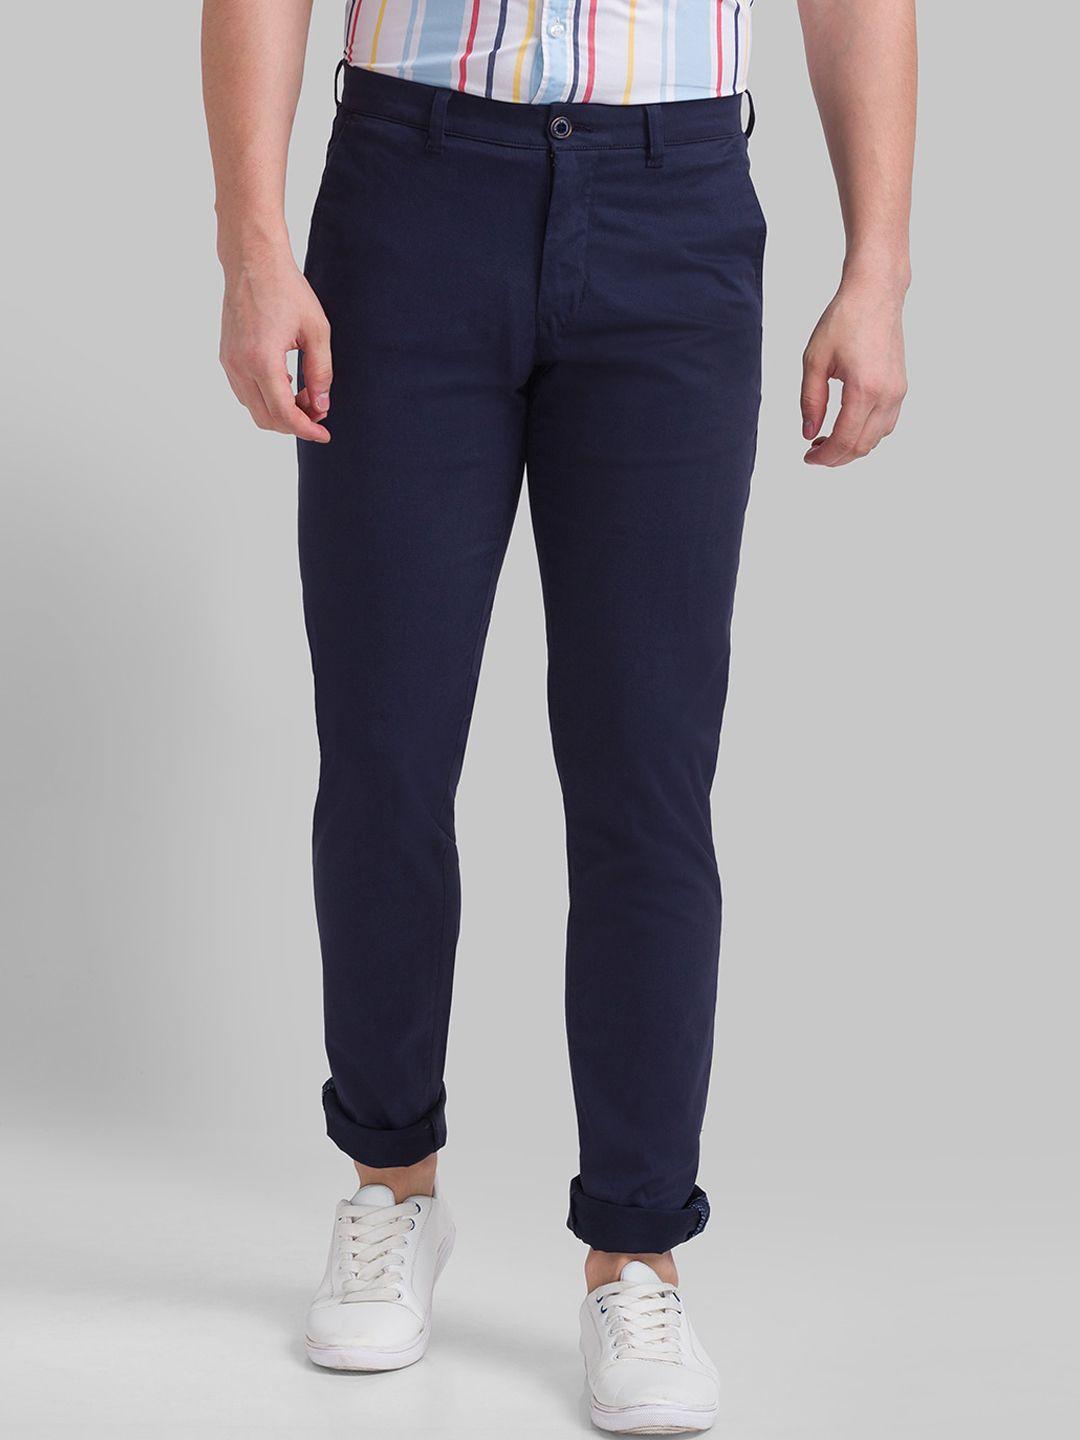 parx-men-blue-tapered-fit-trousers